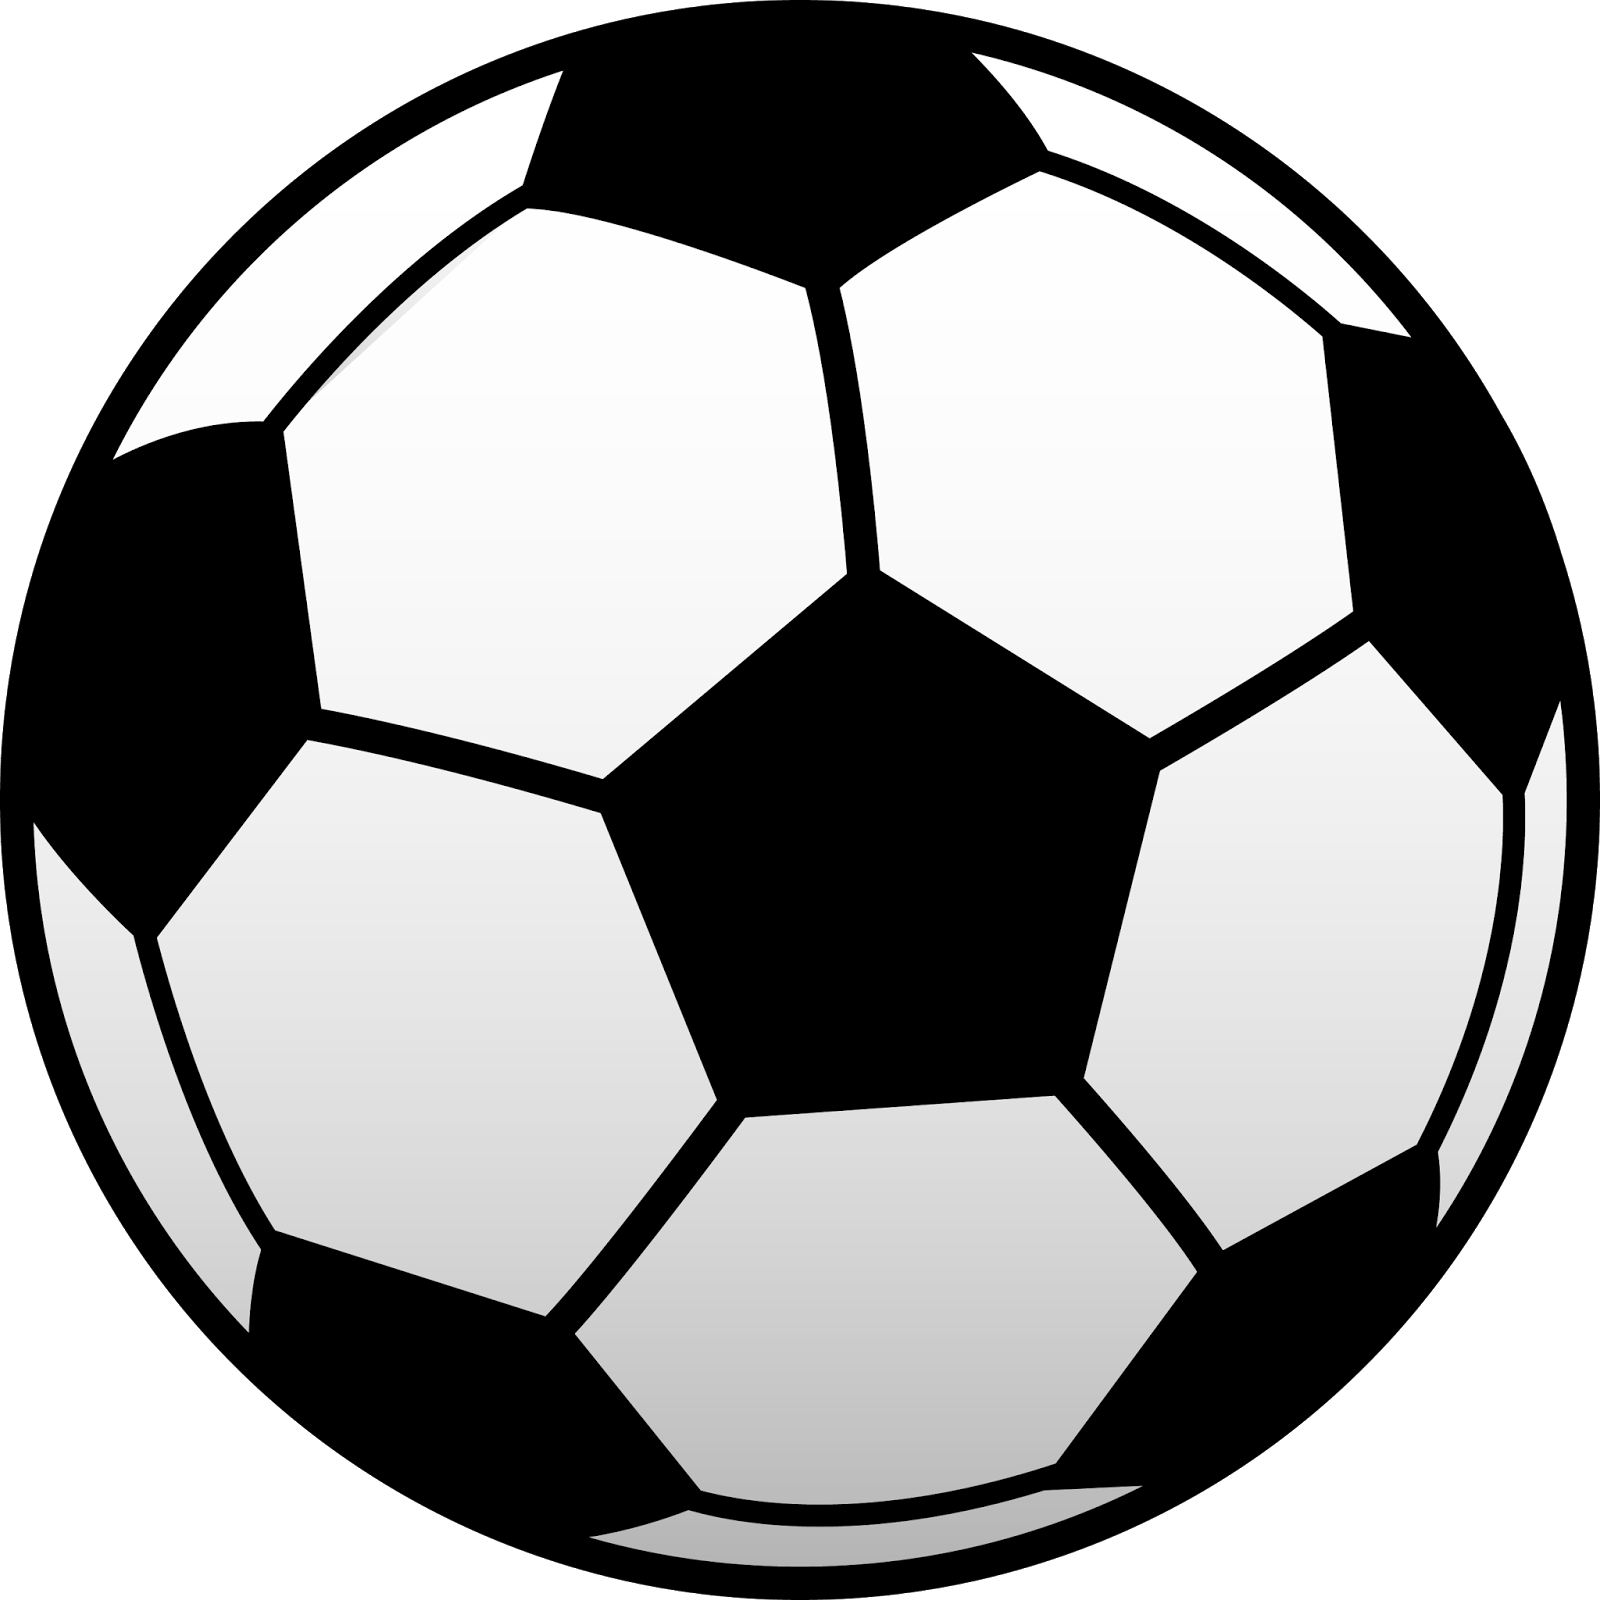 Grass clipart soccer ball.  collection of sports